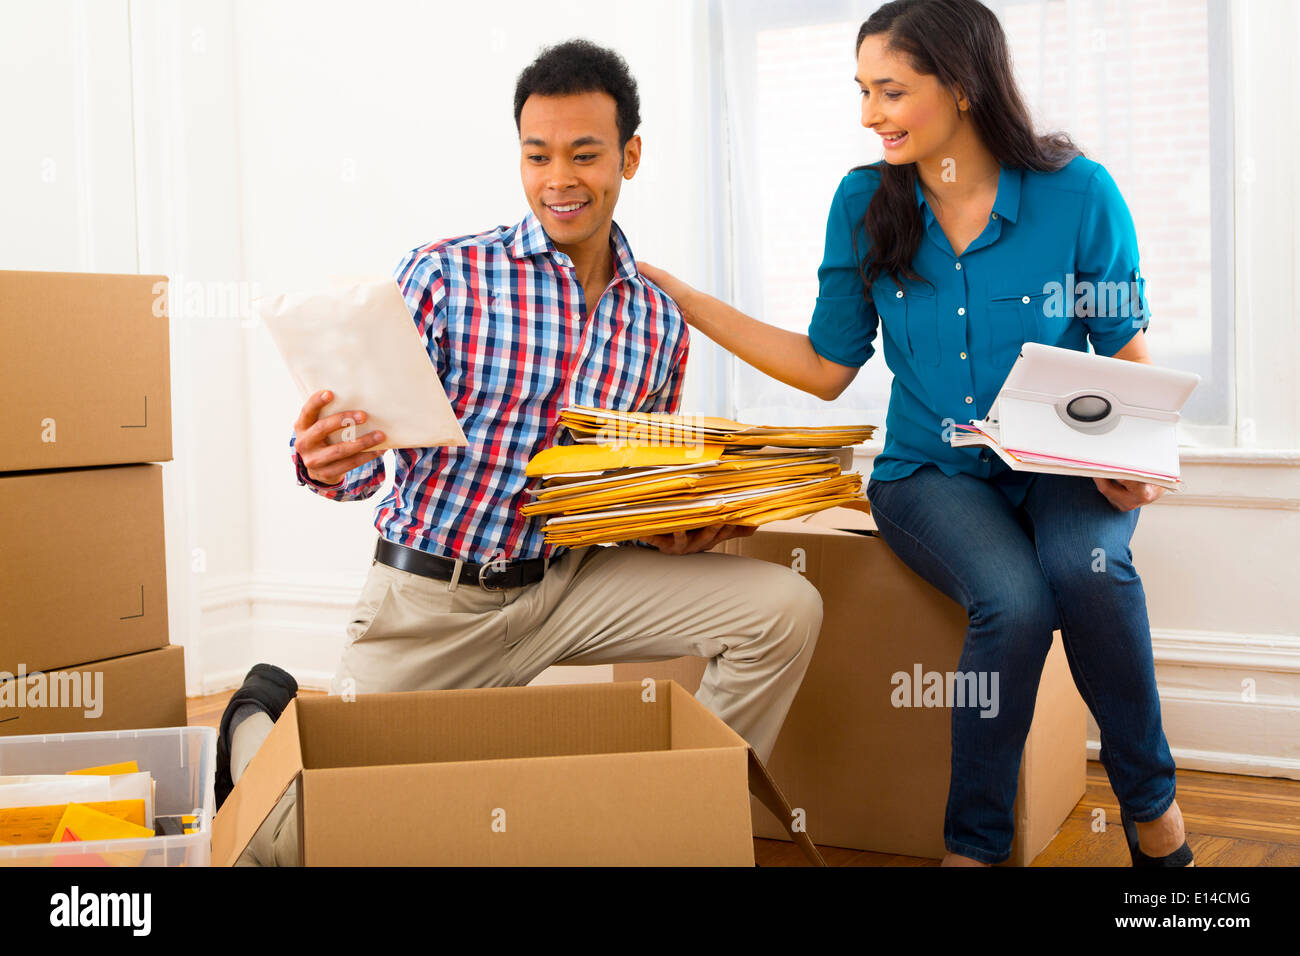 Mixed Race couple packing cardboard boxes Banque D'Images